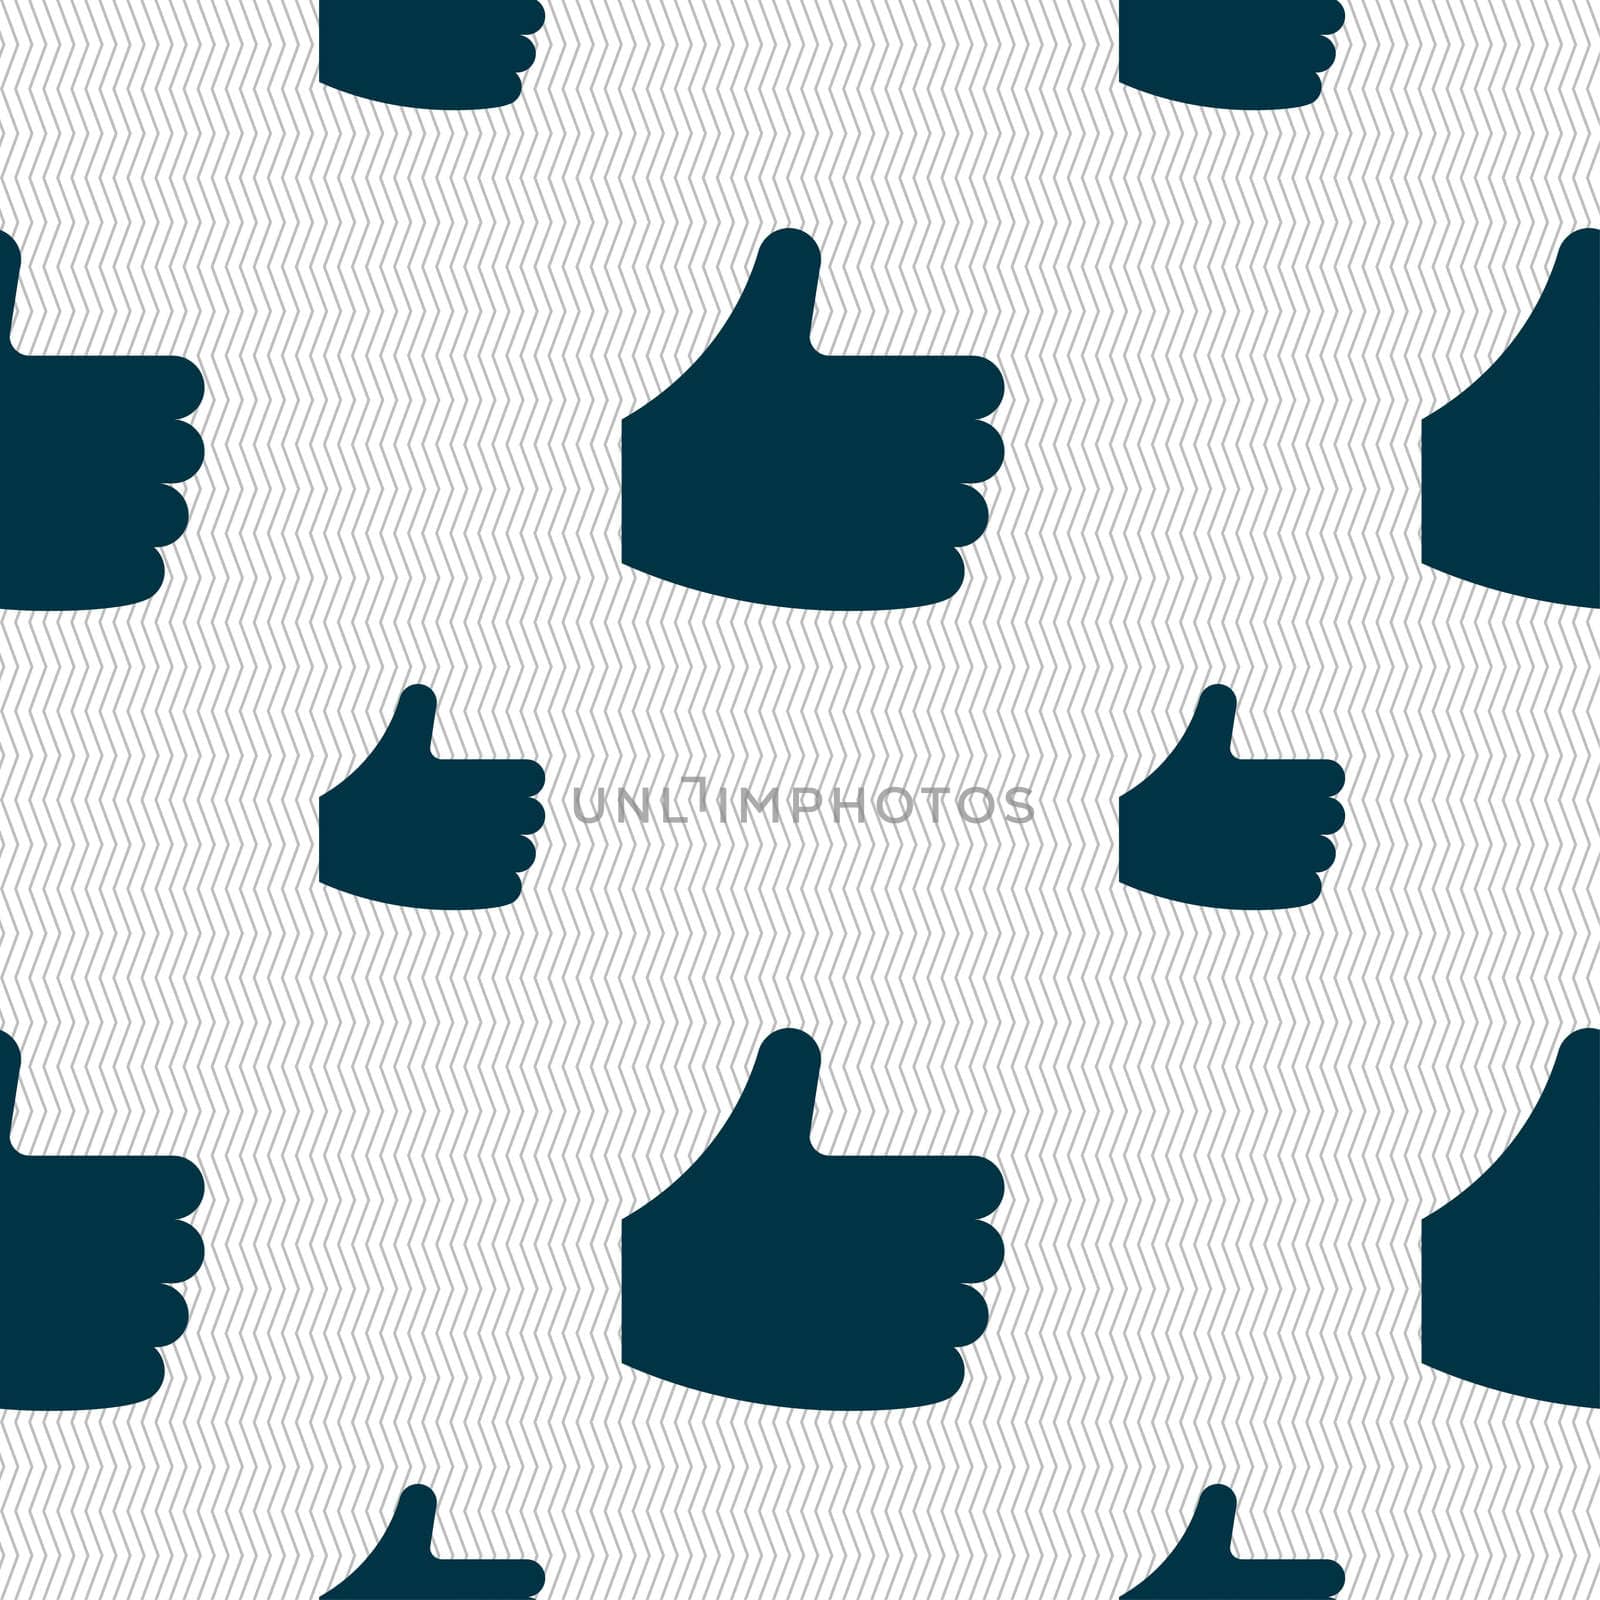 Like, Thumb up icon sign. Seamless pattern with geometric texture. illustration